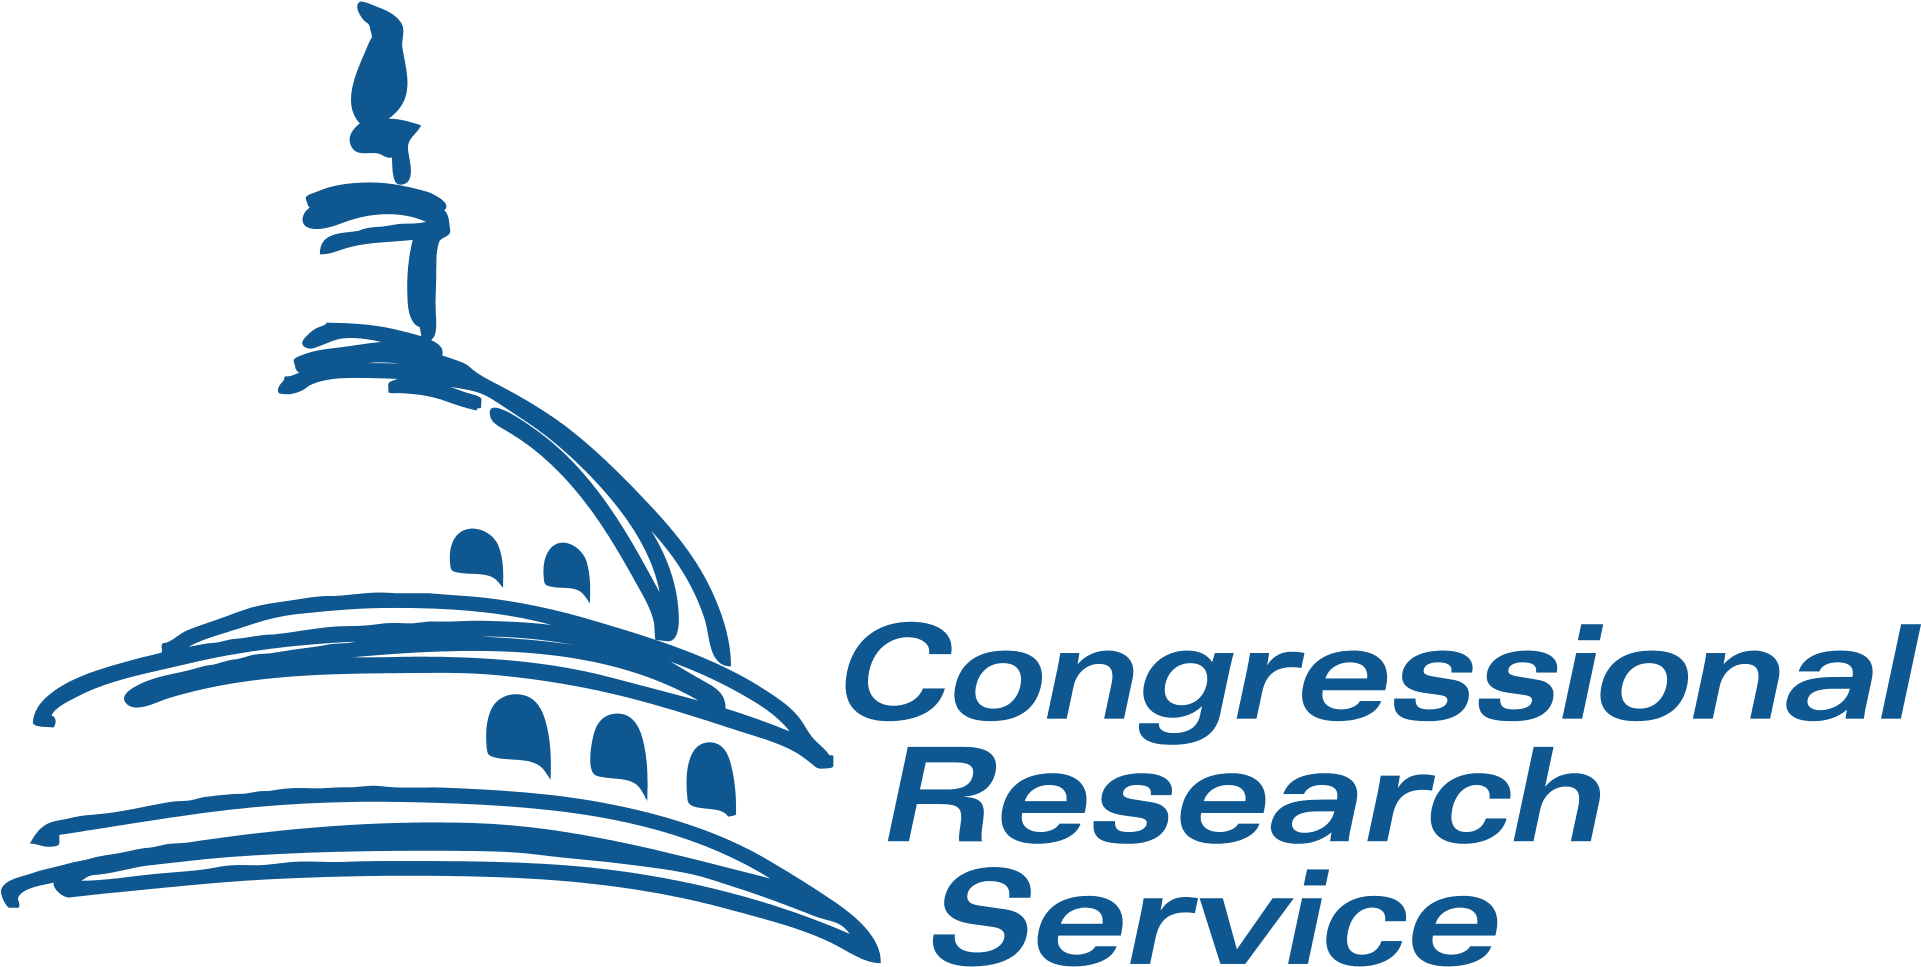 Congressional Research Service (2000x1100)